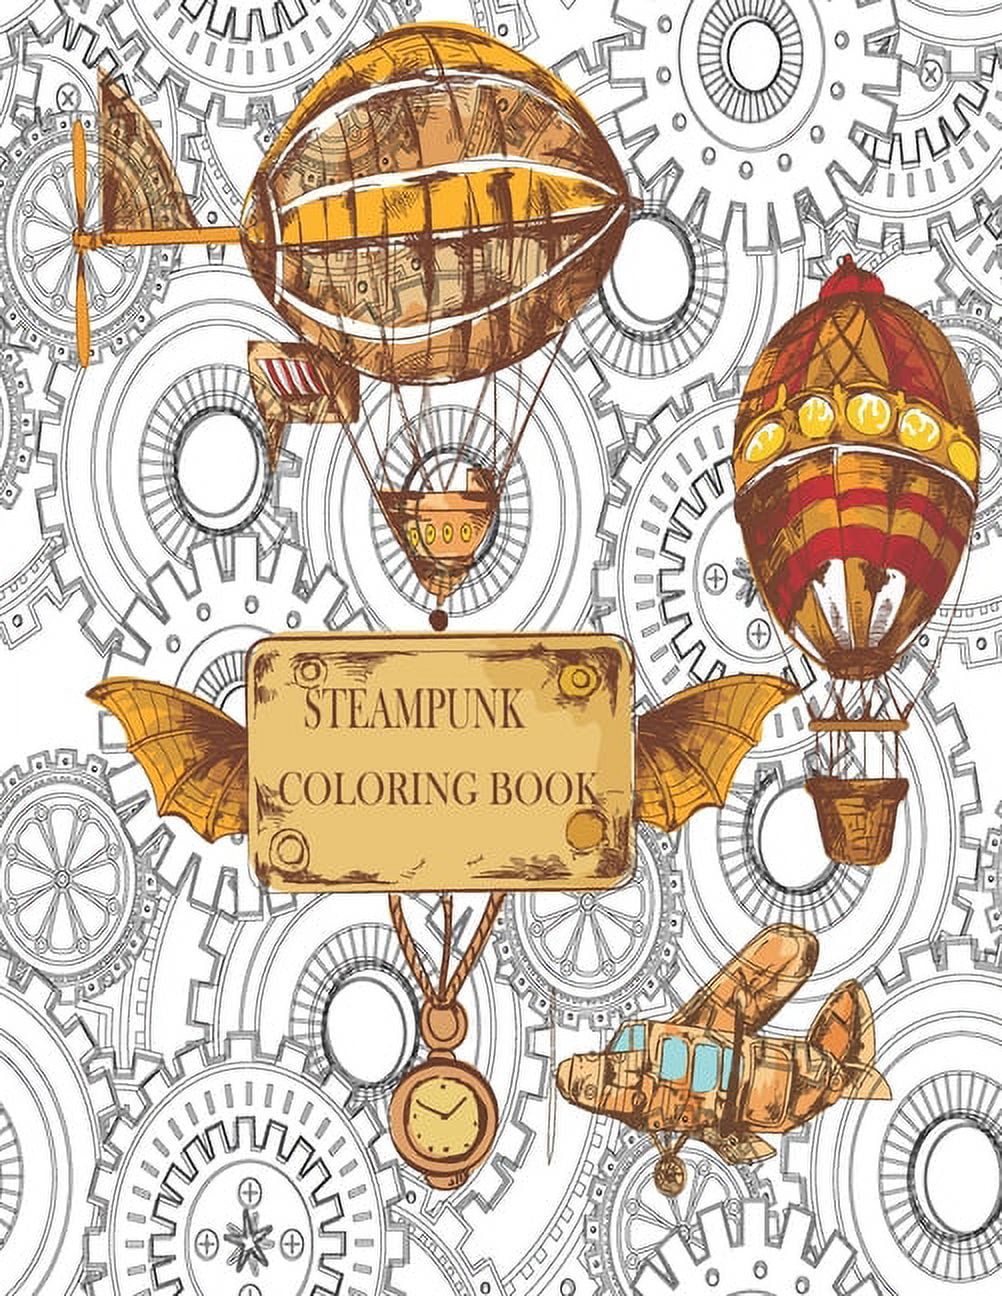  Steampunk Coloring Book For Adults: Steampunk Art